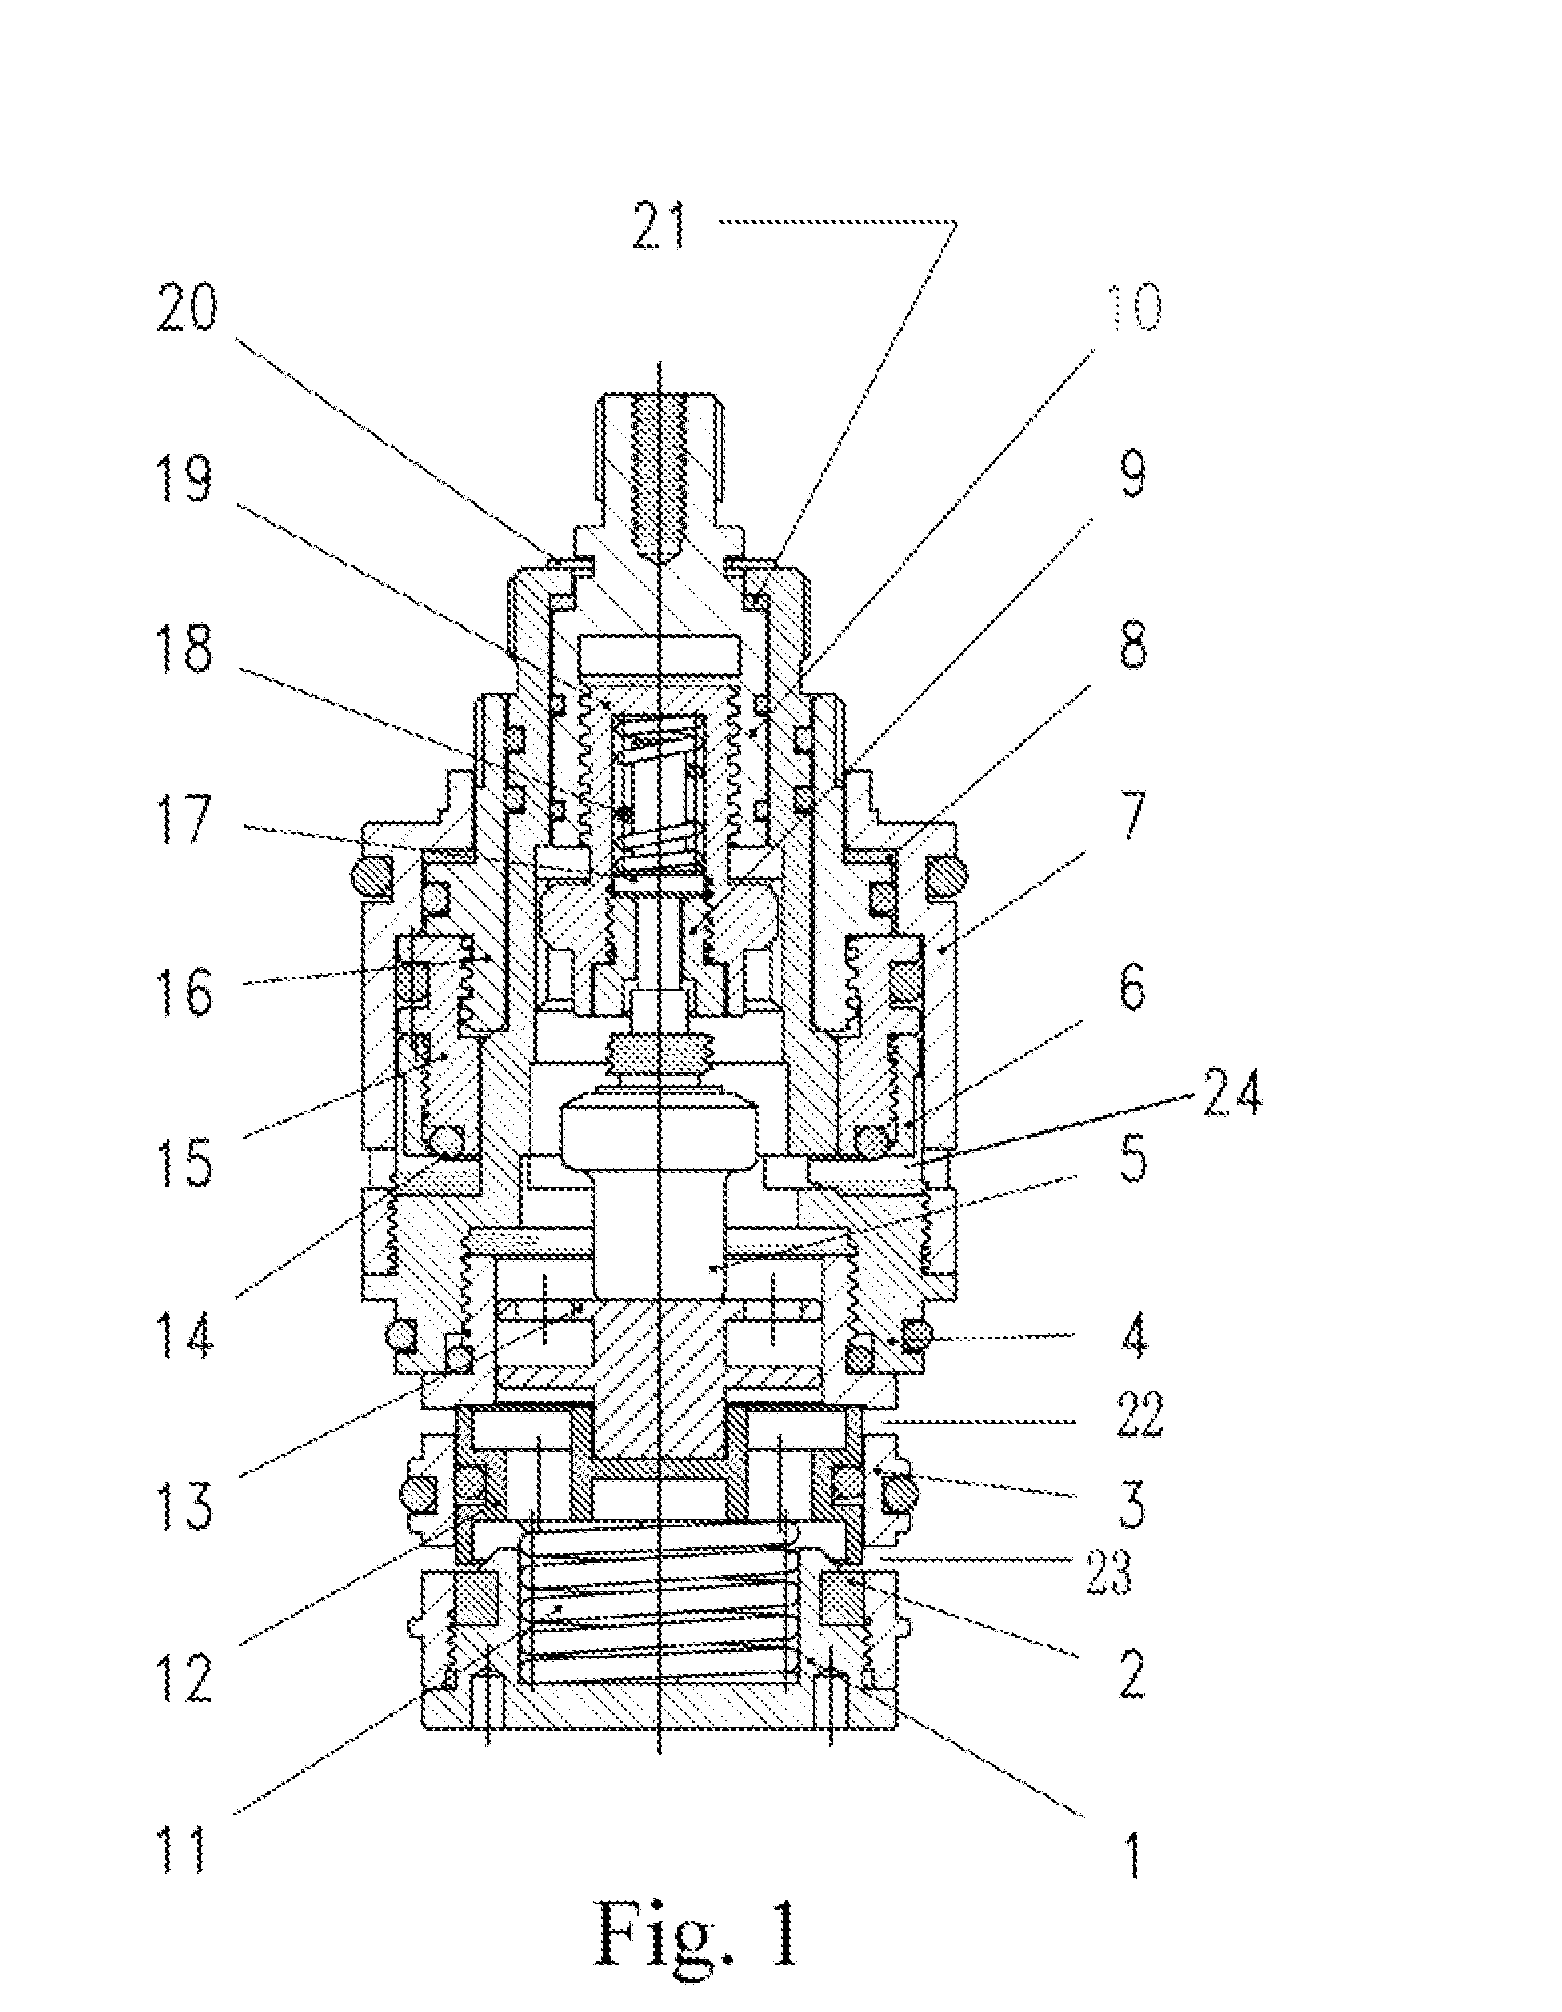 Constant temperature valve core with dual stems and dual functions